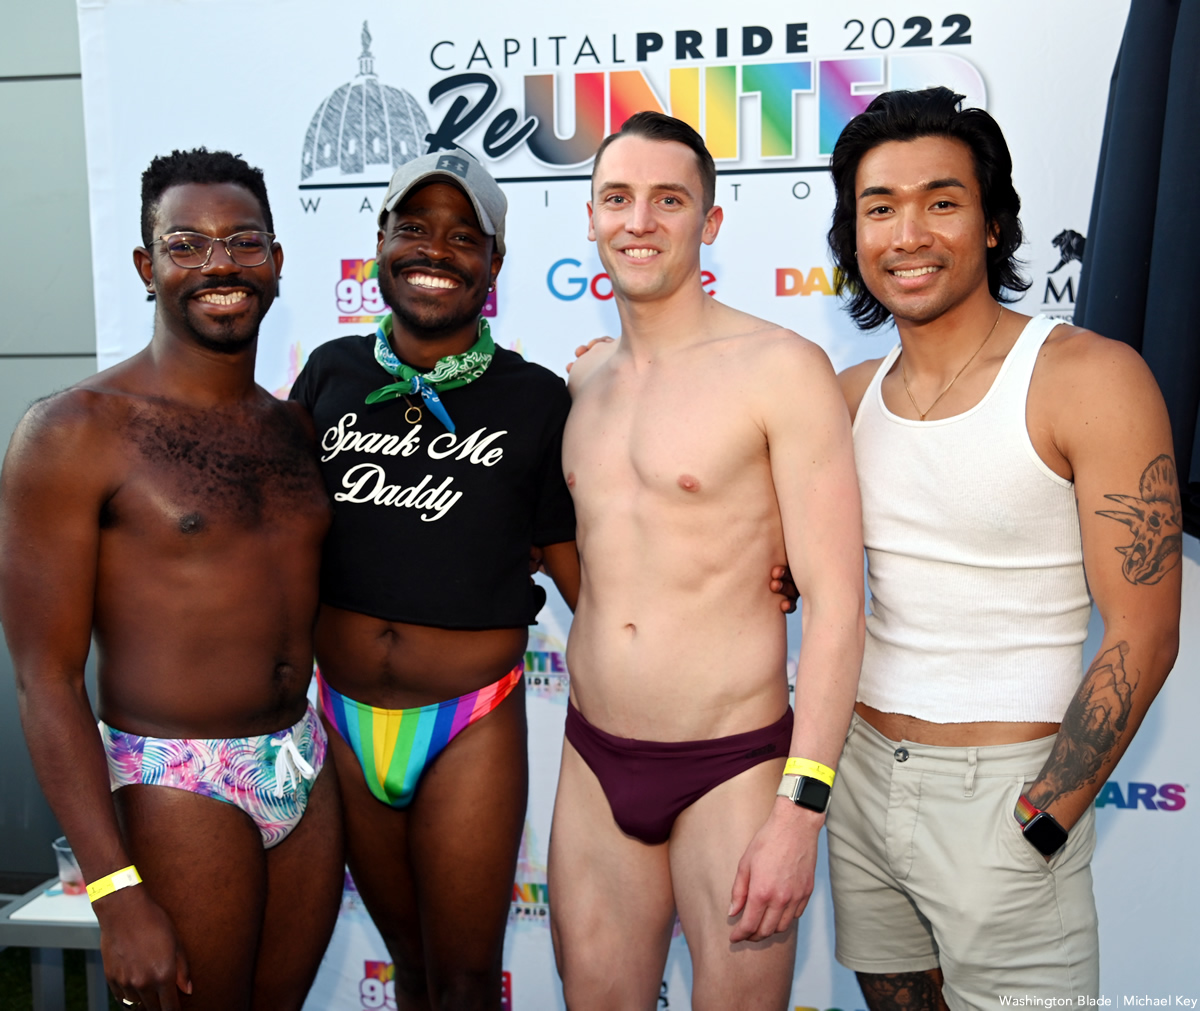 Capital Pride Rooftop Pool Party - Capital Pride Alliance